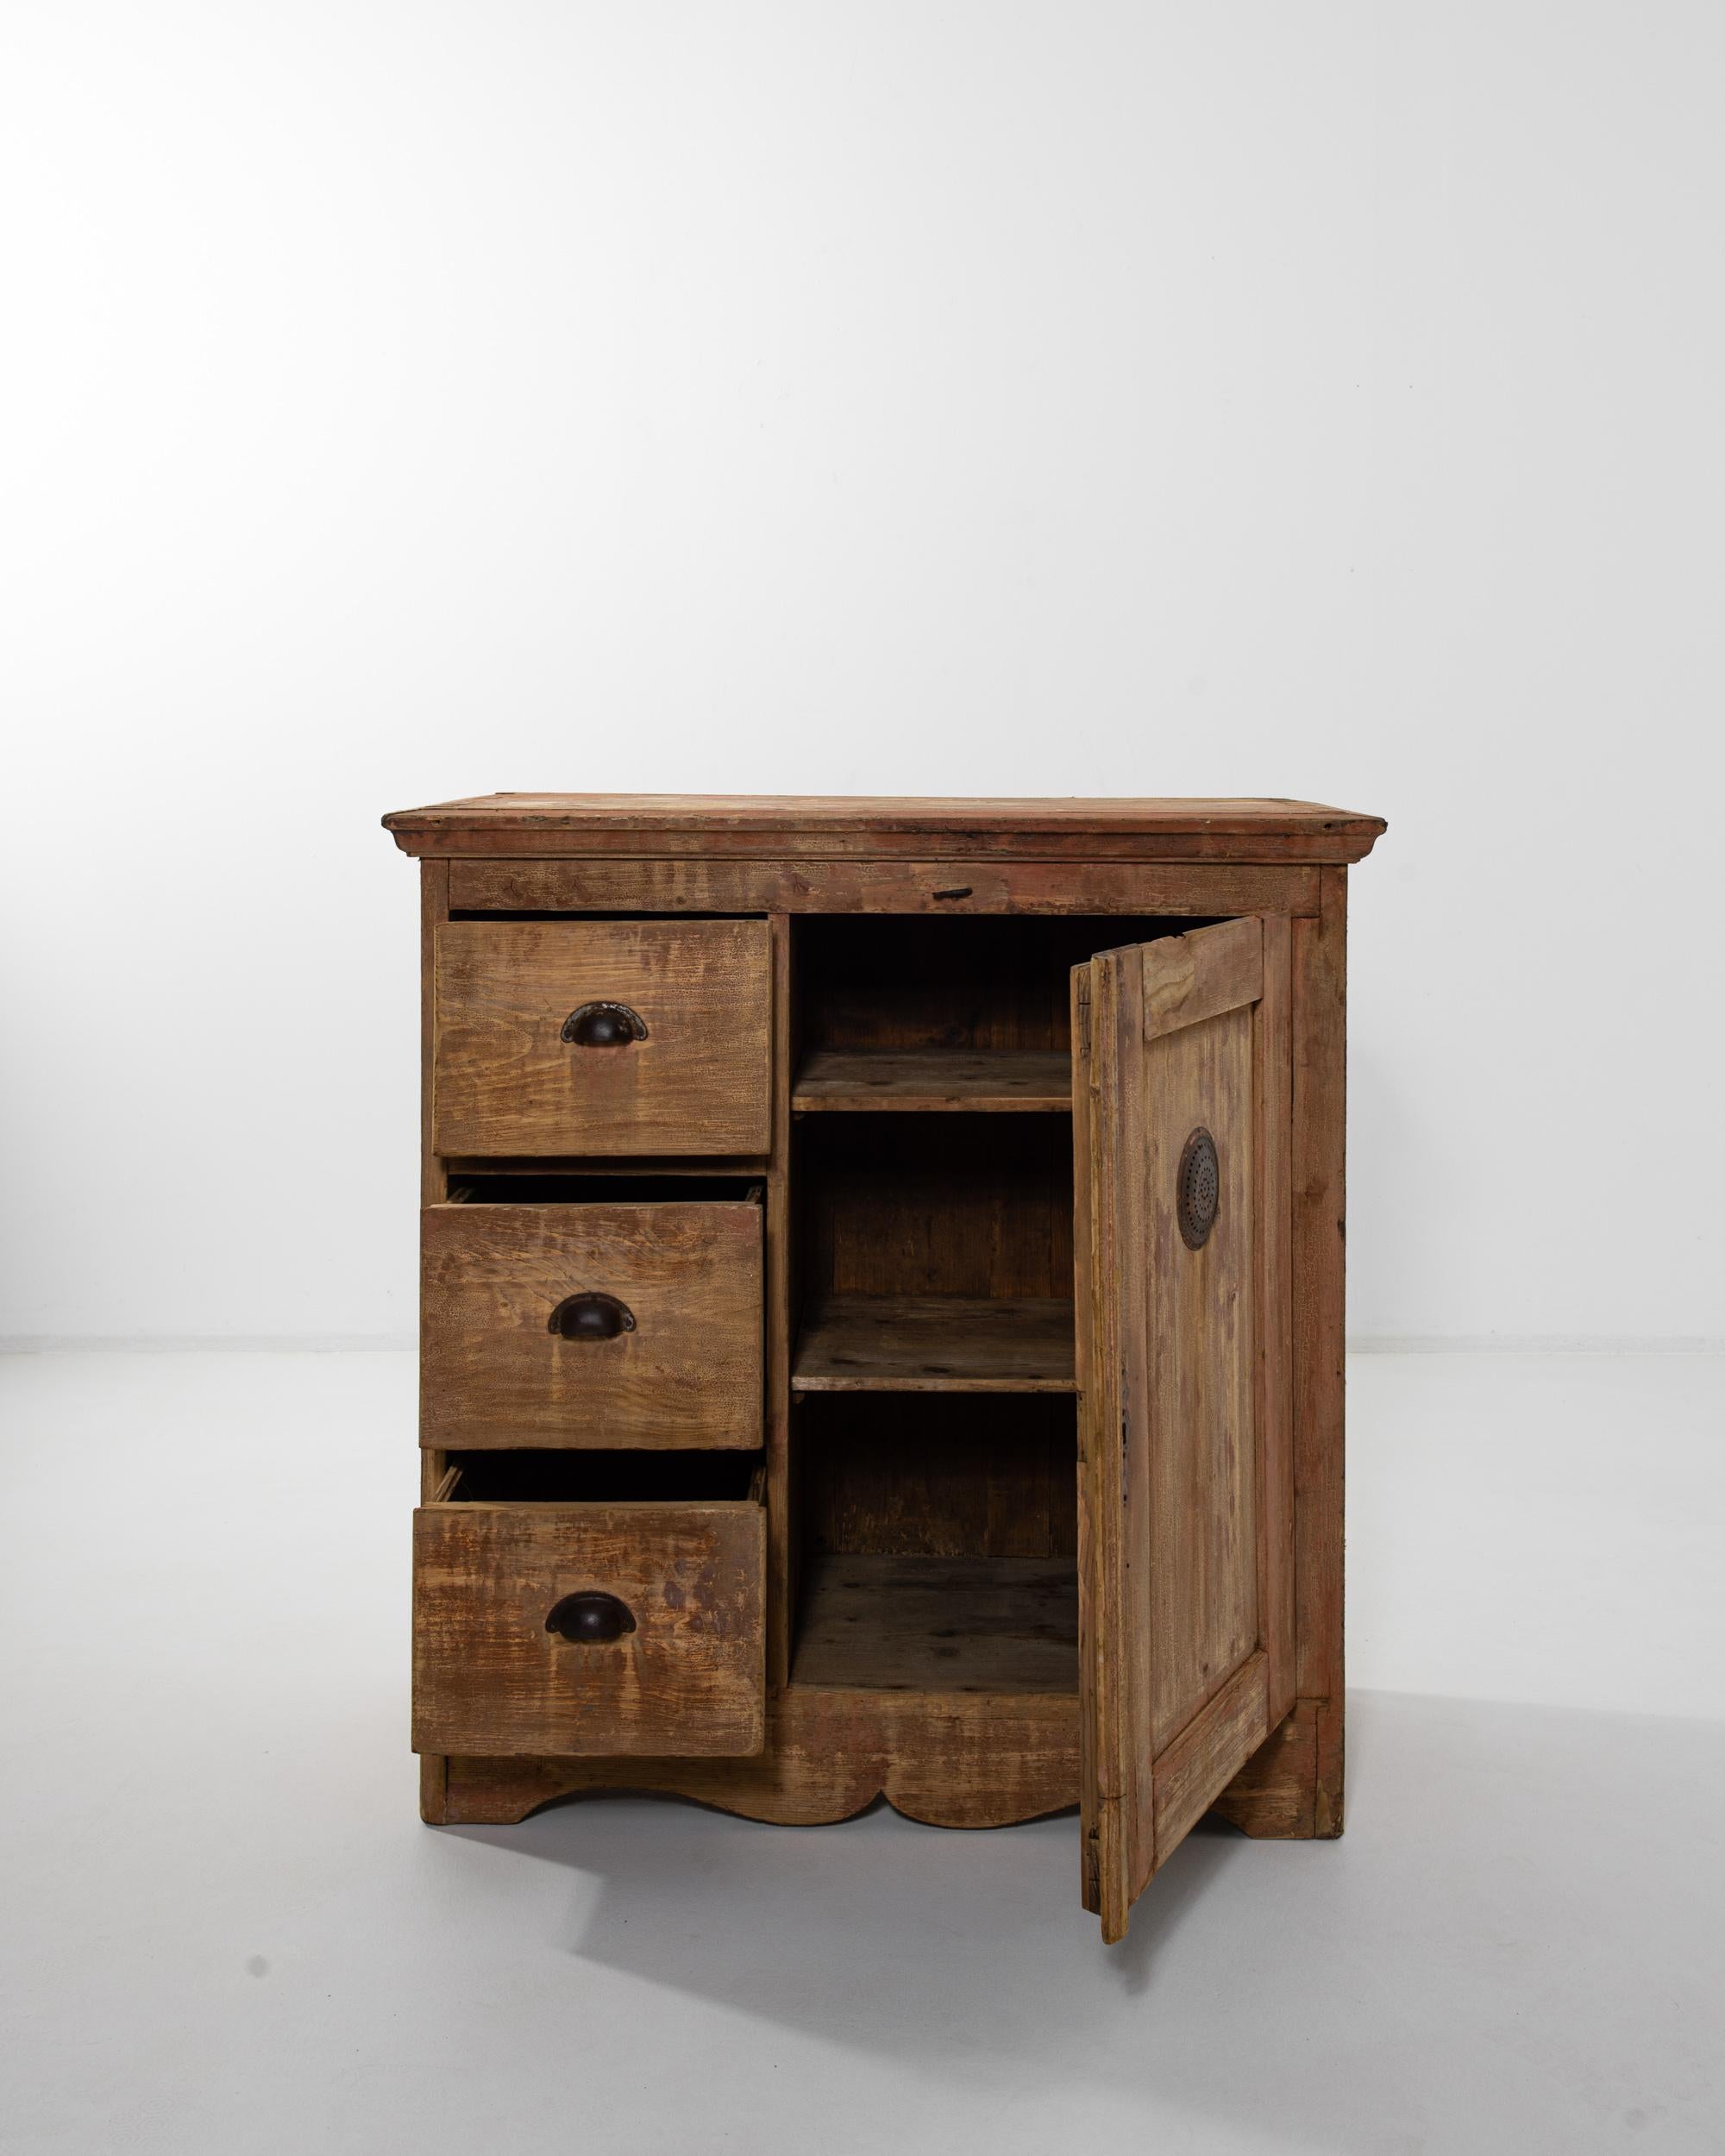 German 19th Century Central European Wooden Cupboard For Sale